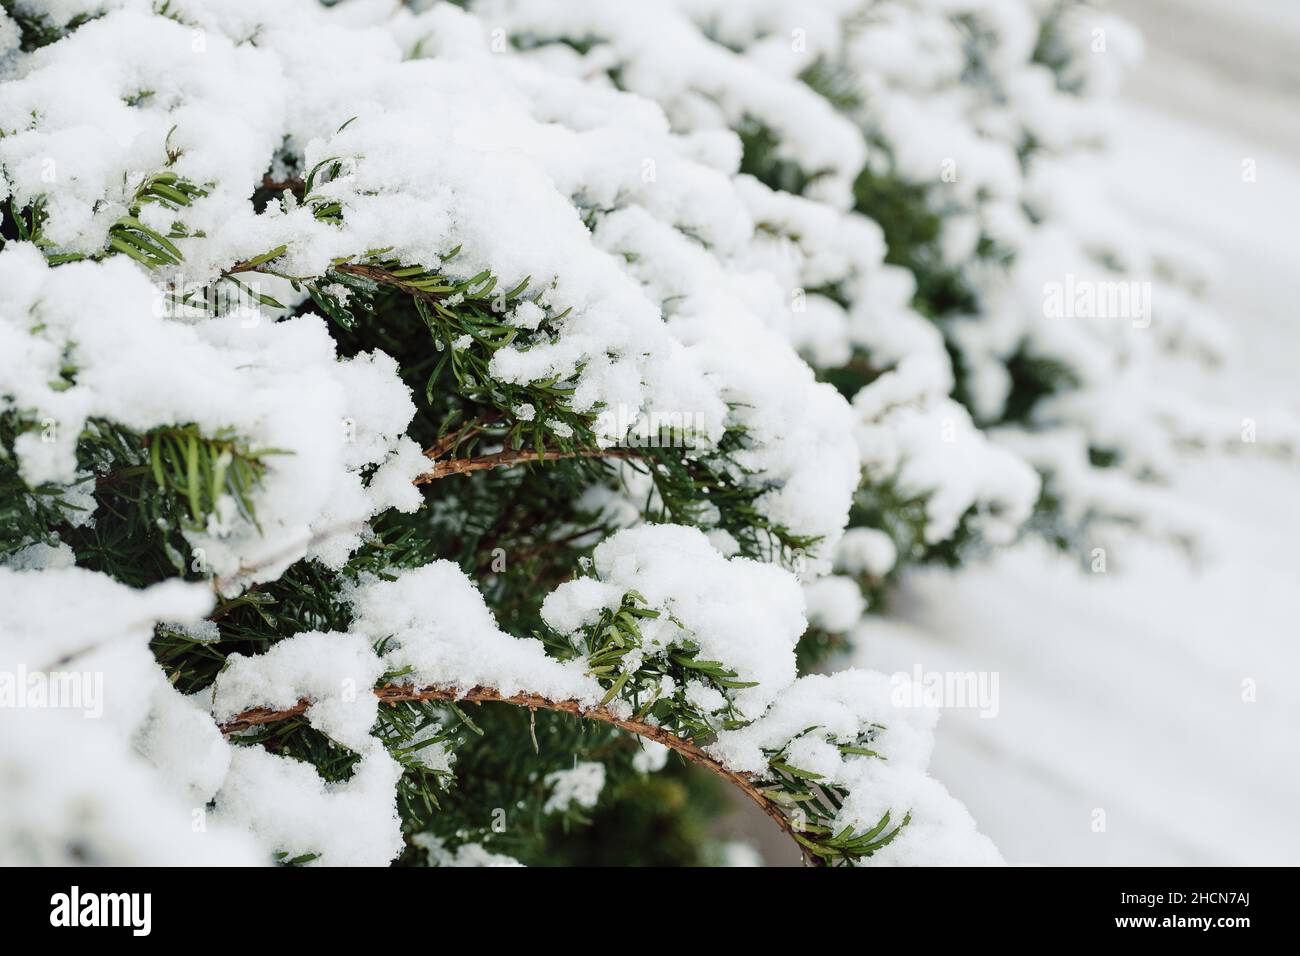 Frozen Evergreen Bush Covered in Snow During Blizzard Stock Photo